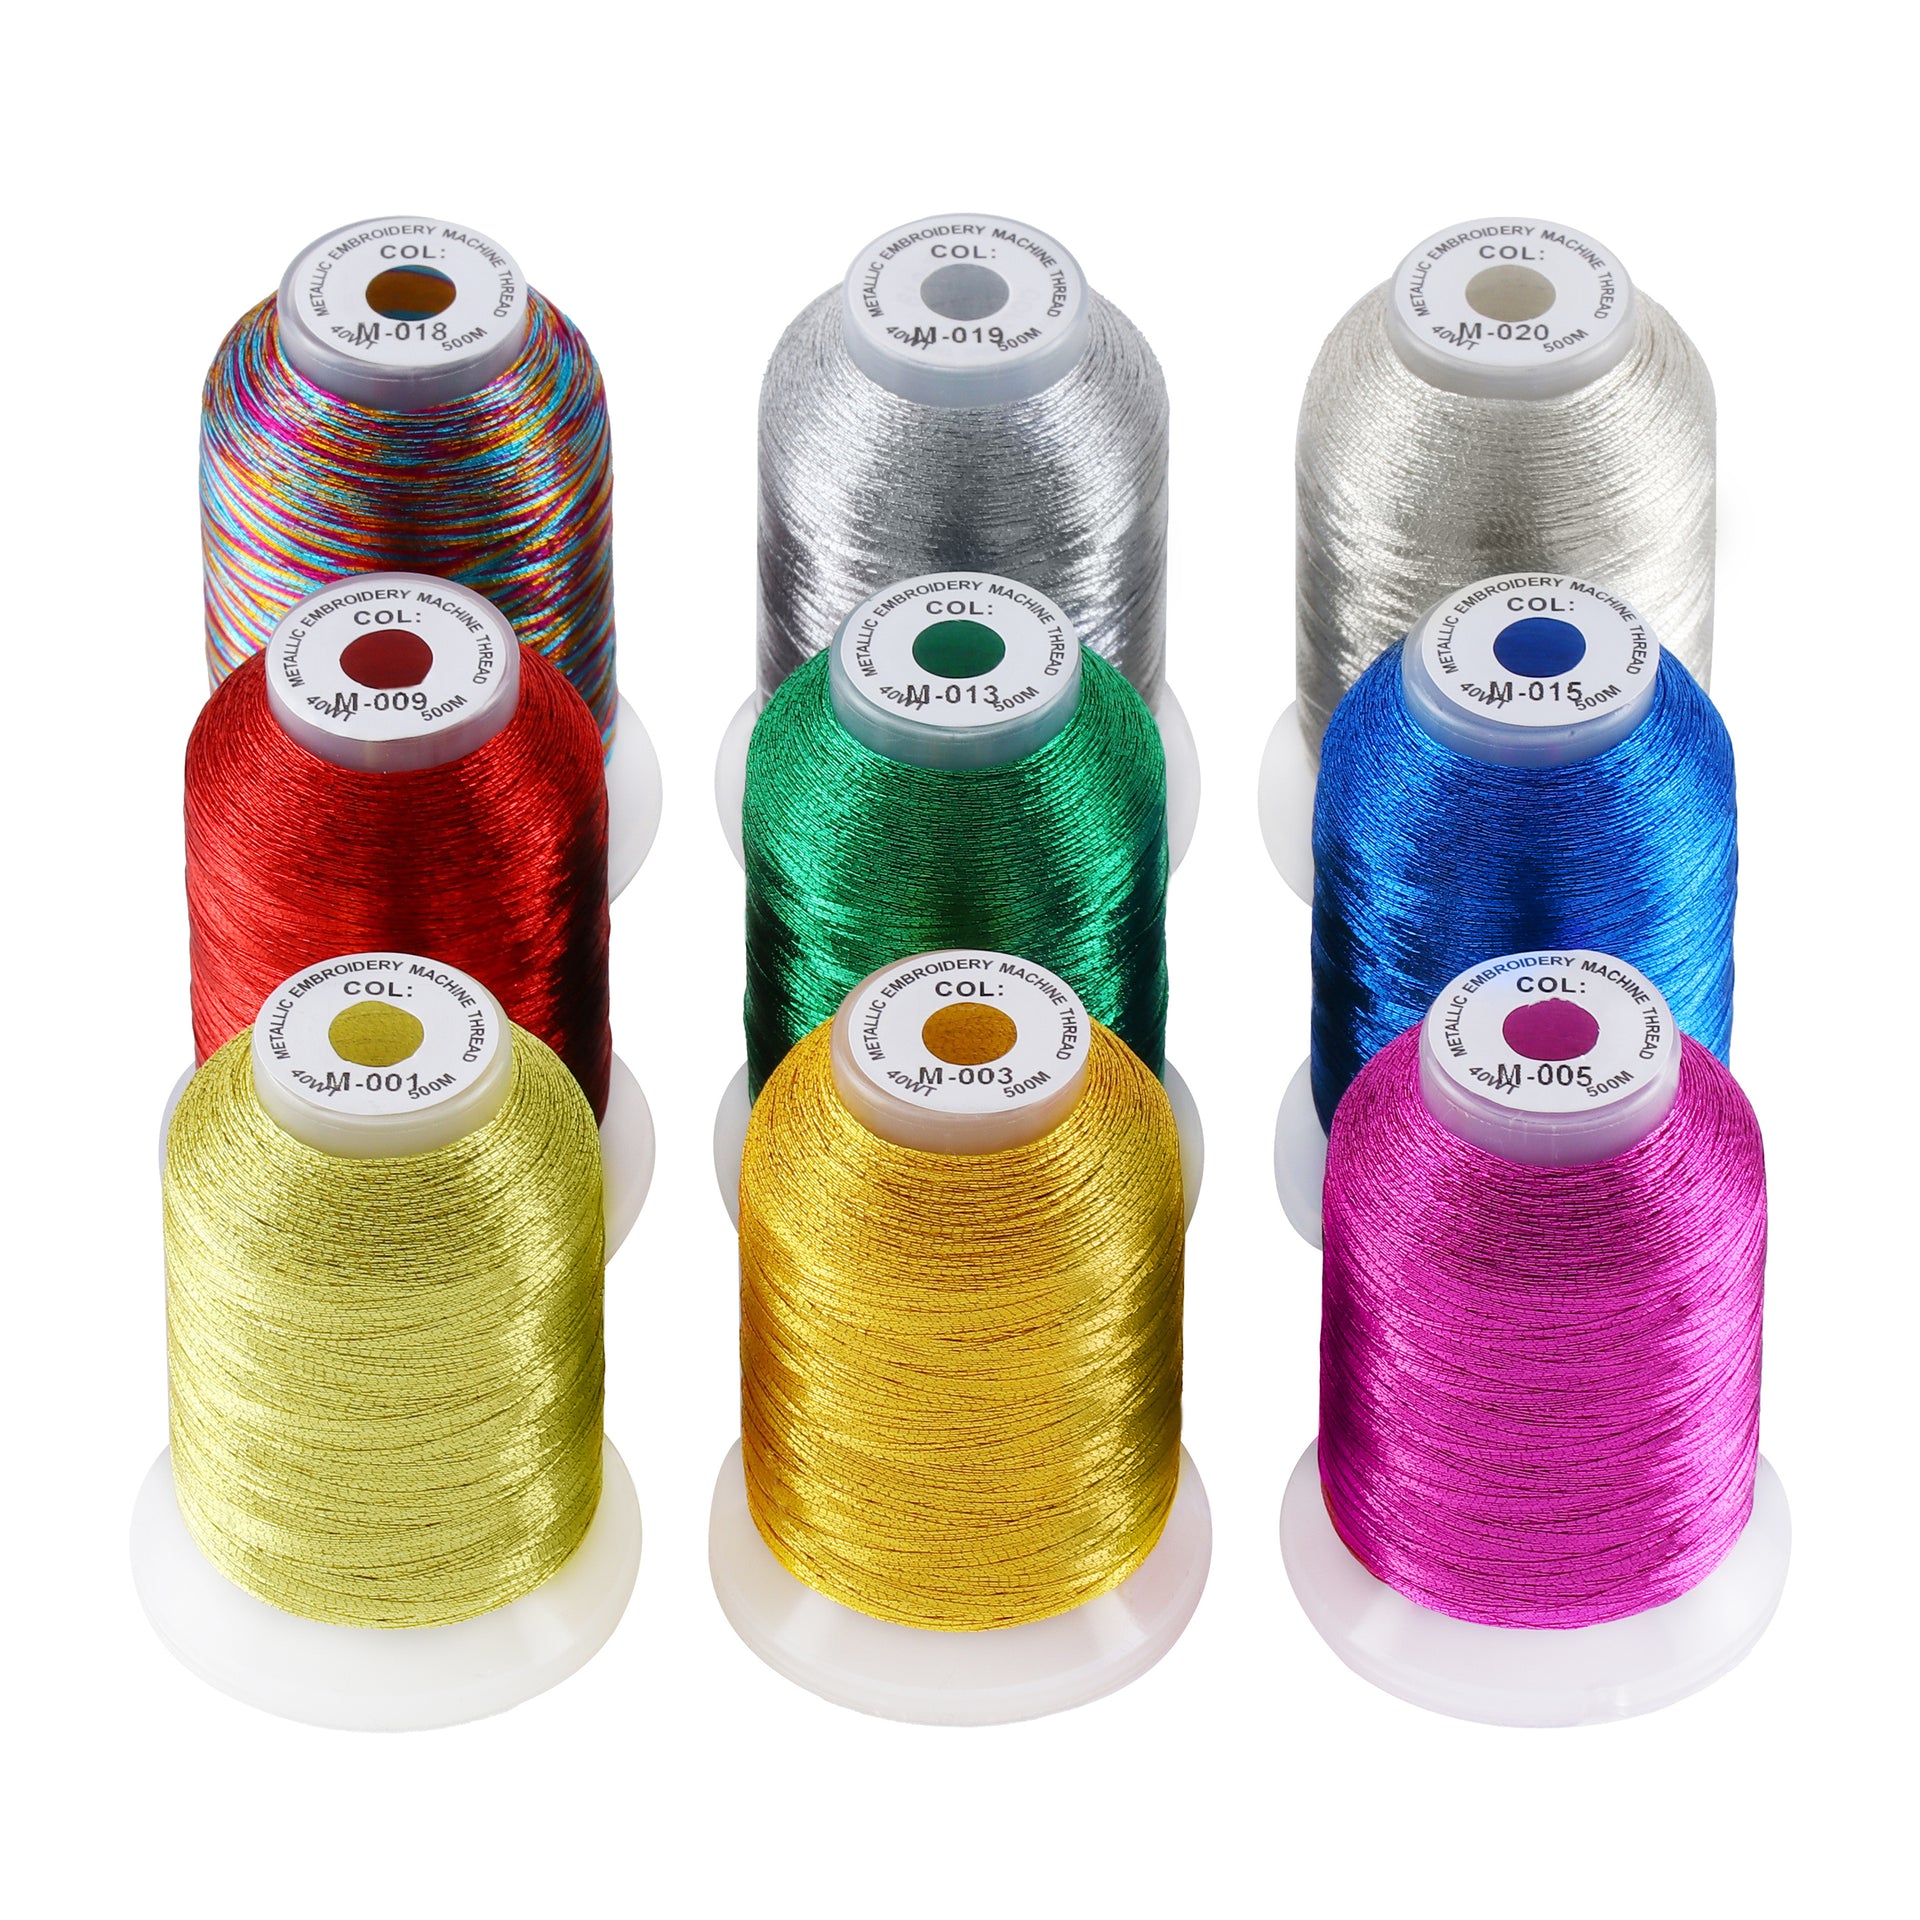 Variegated Polyester Sewing Thread Kit 20 Spools 1000 Yards Each for Hand  Sewing,Quilting,Embroidery and Sewing Machine Use